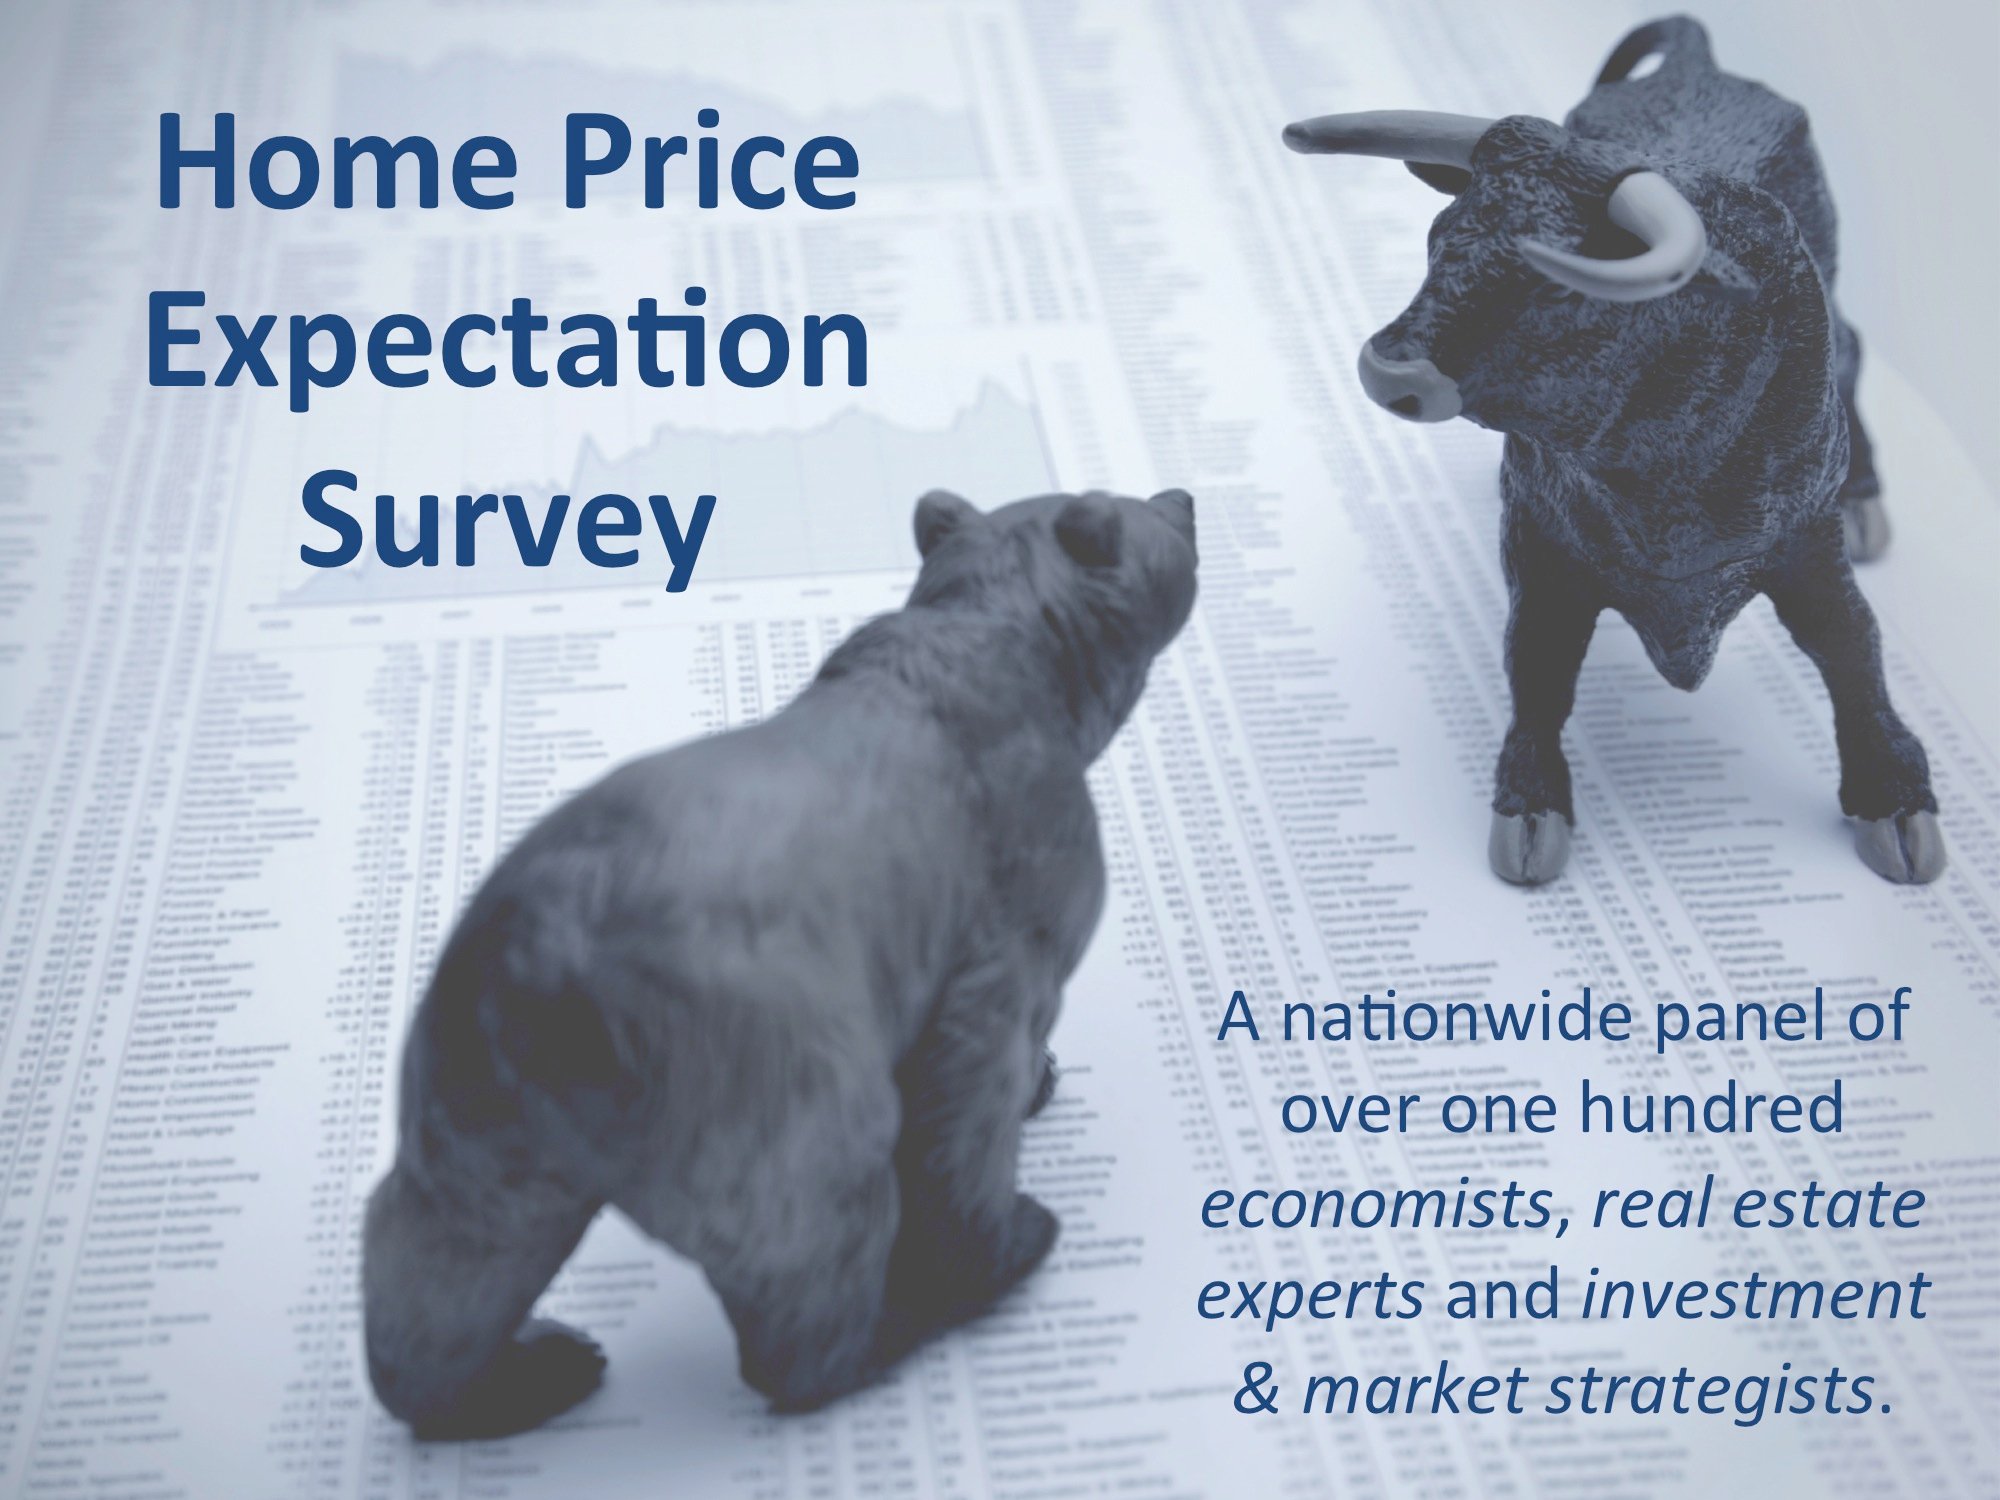 Home Price Expectation Survey Slides [UPDATE]